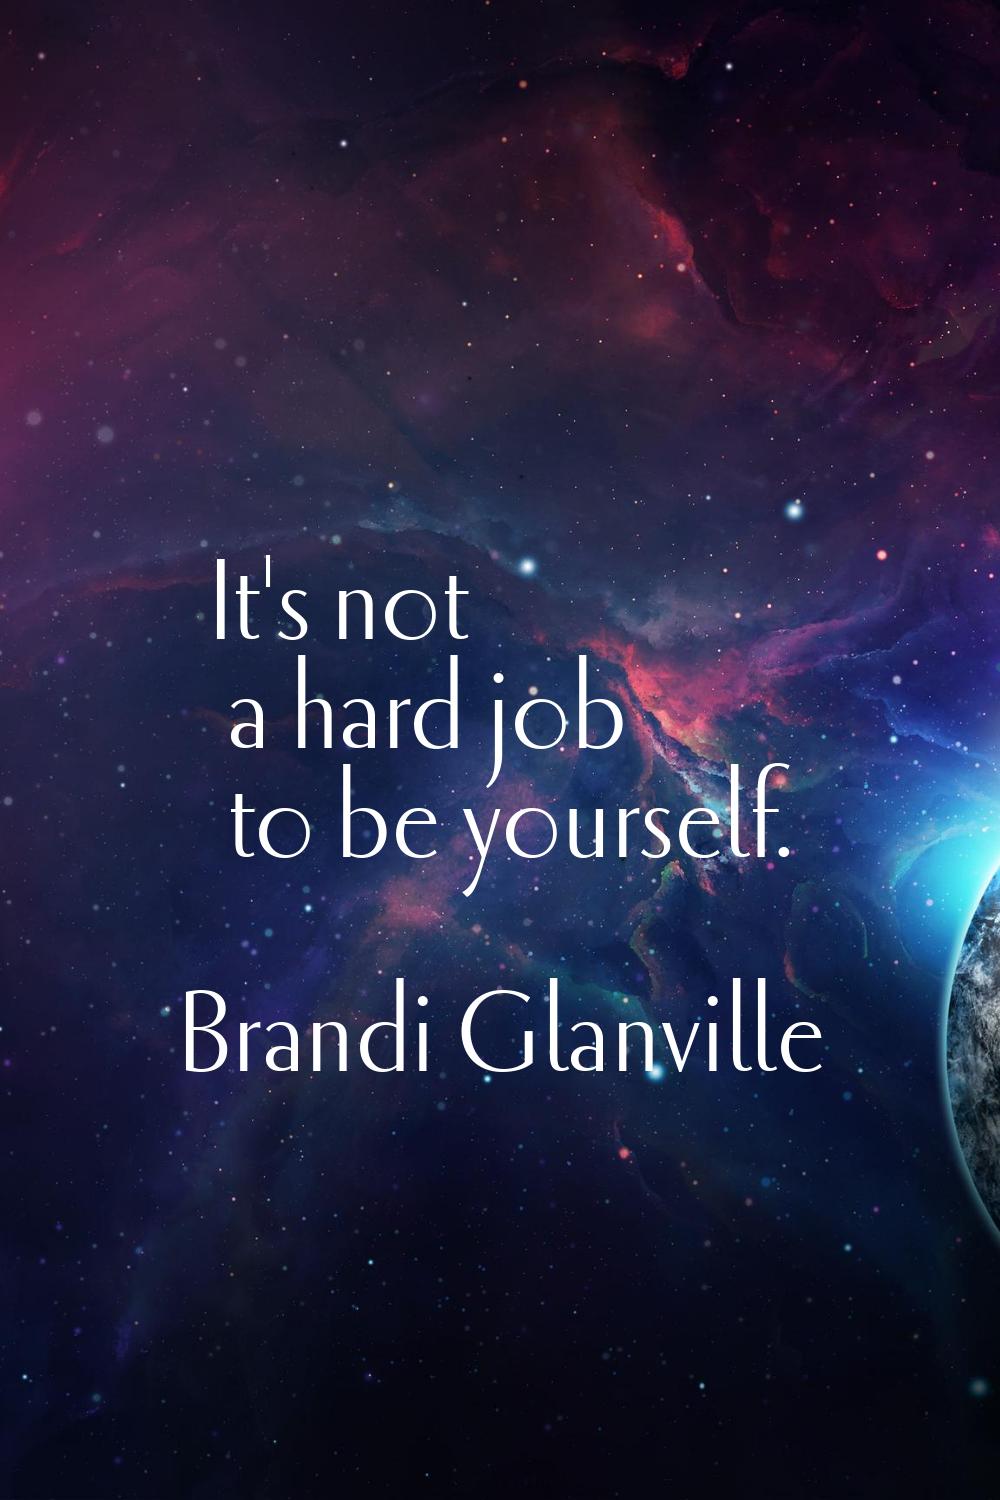 It's not a hard job to be yourself.